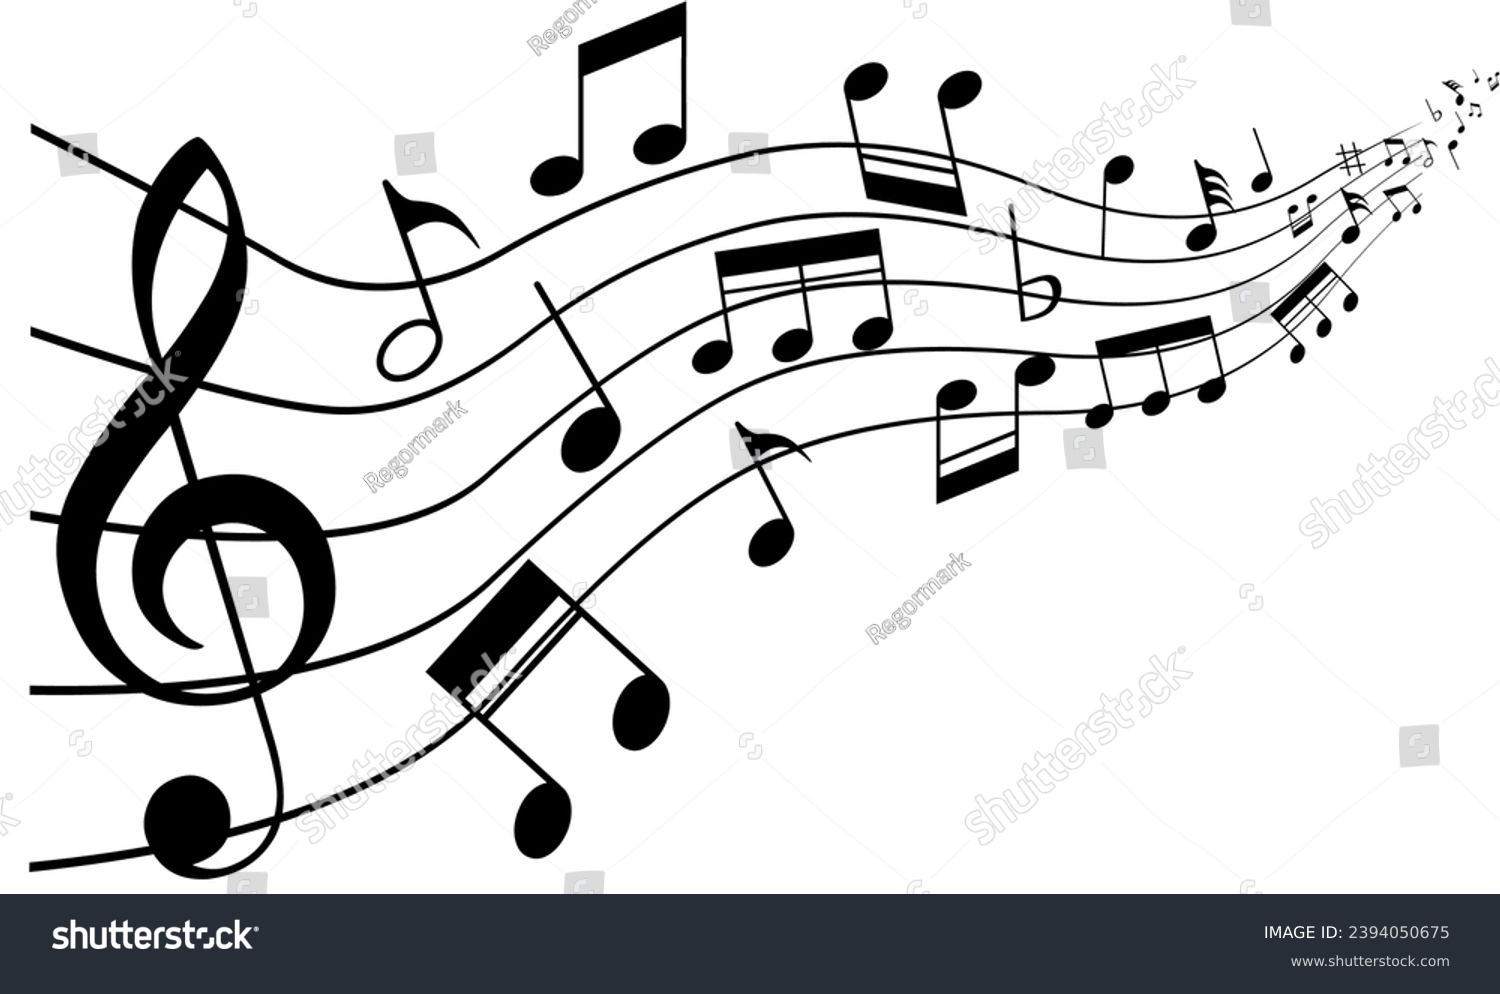 SVG of Vector with symbols and musical notes svg